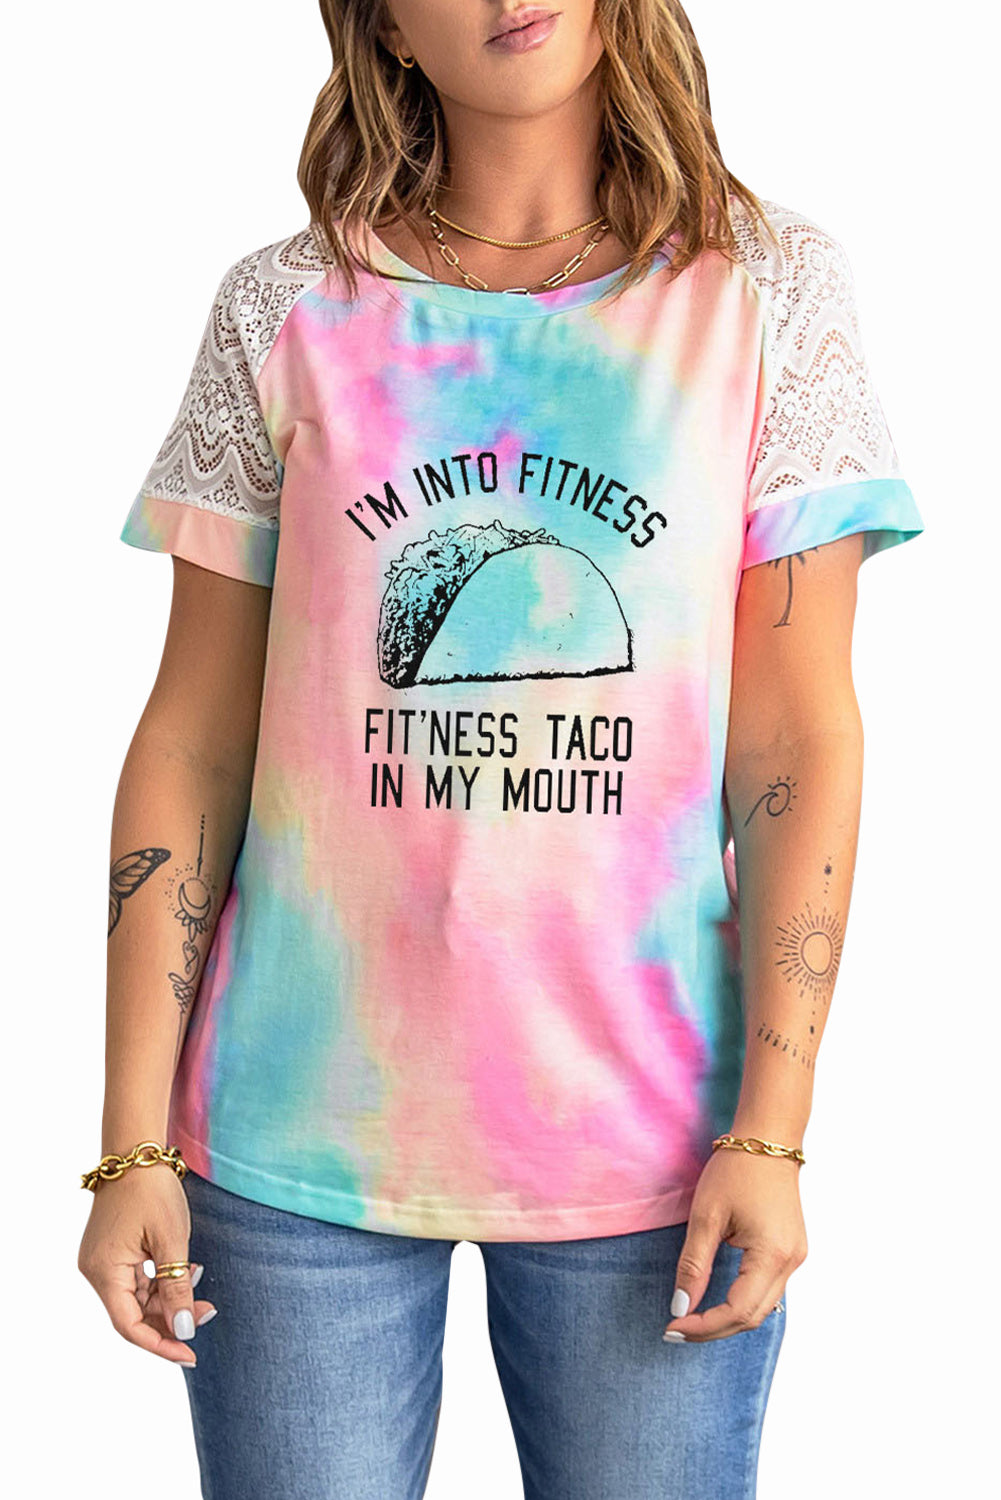 Multicolor Fitness Taco in My Mouth Graphic Tie Dye Lace Sleeve T-Shirt Graphic Tees JT's Designer Fashion